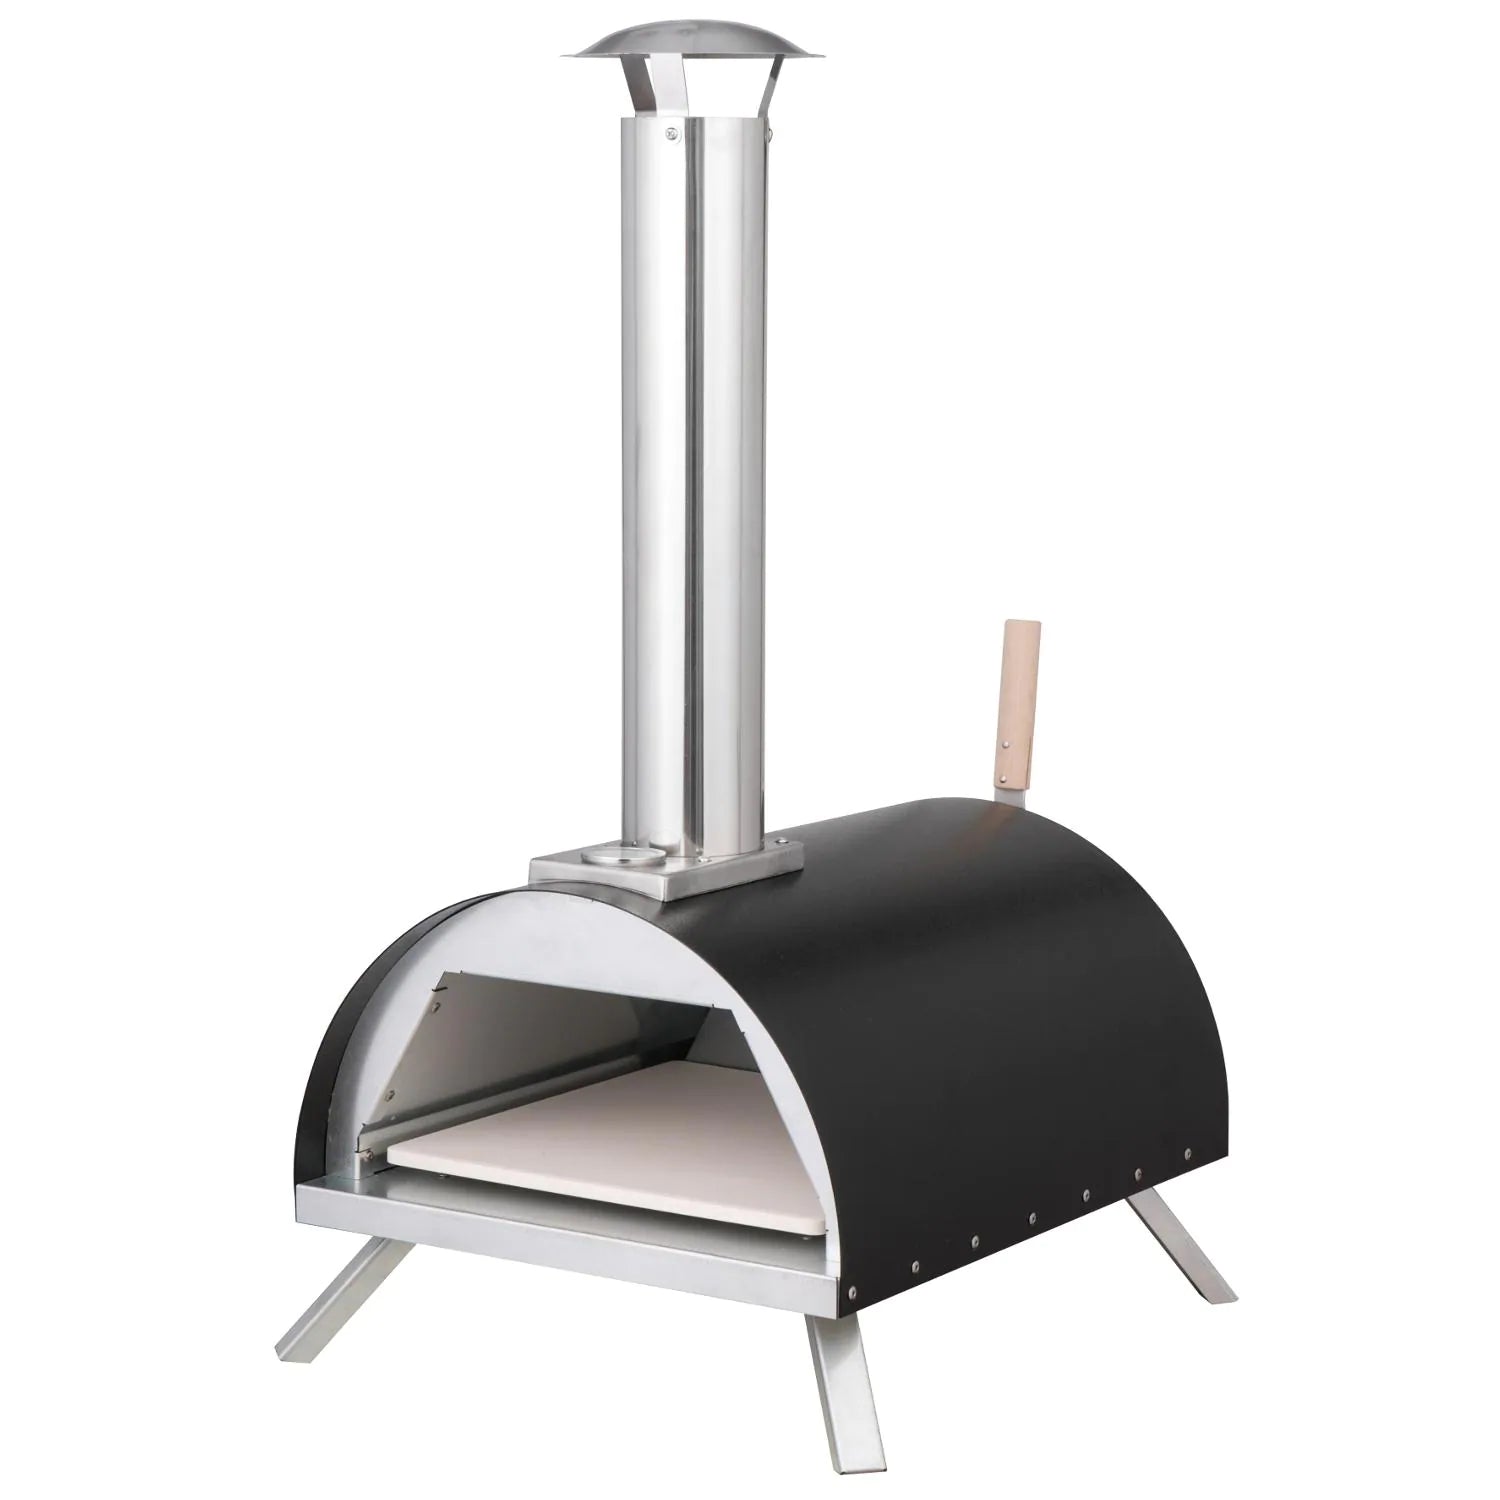 WPPO Le Peppe Portable Wood Fired Pizza Oven Oven Door removed